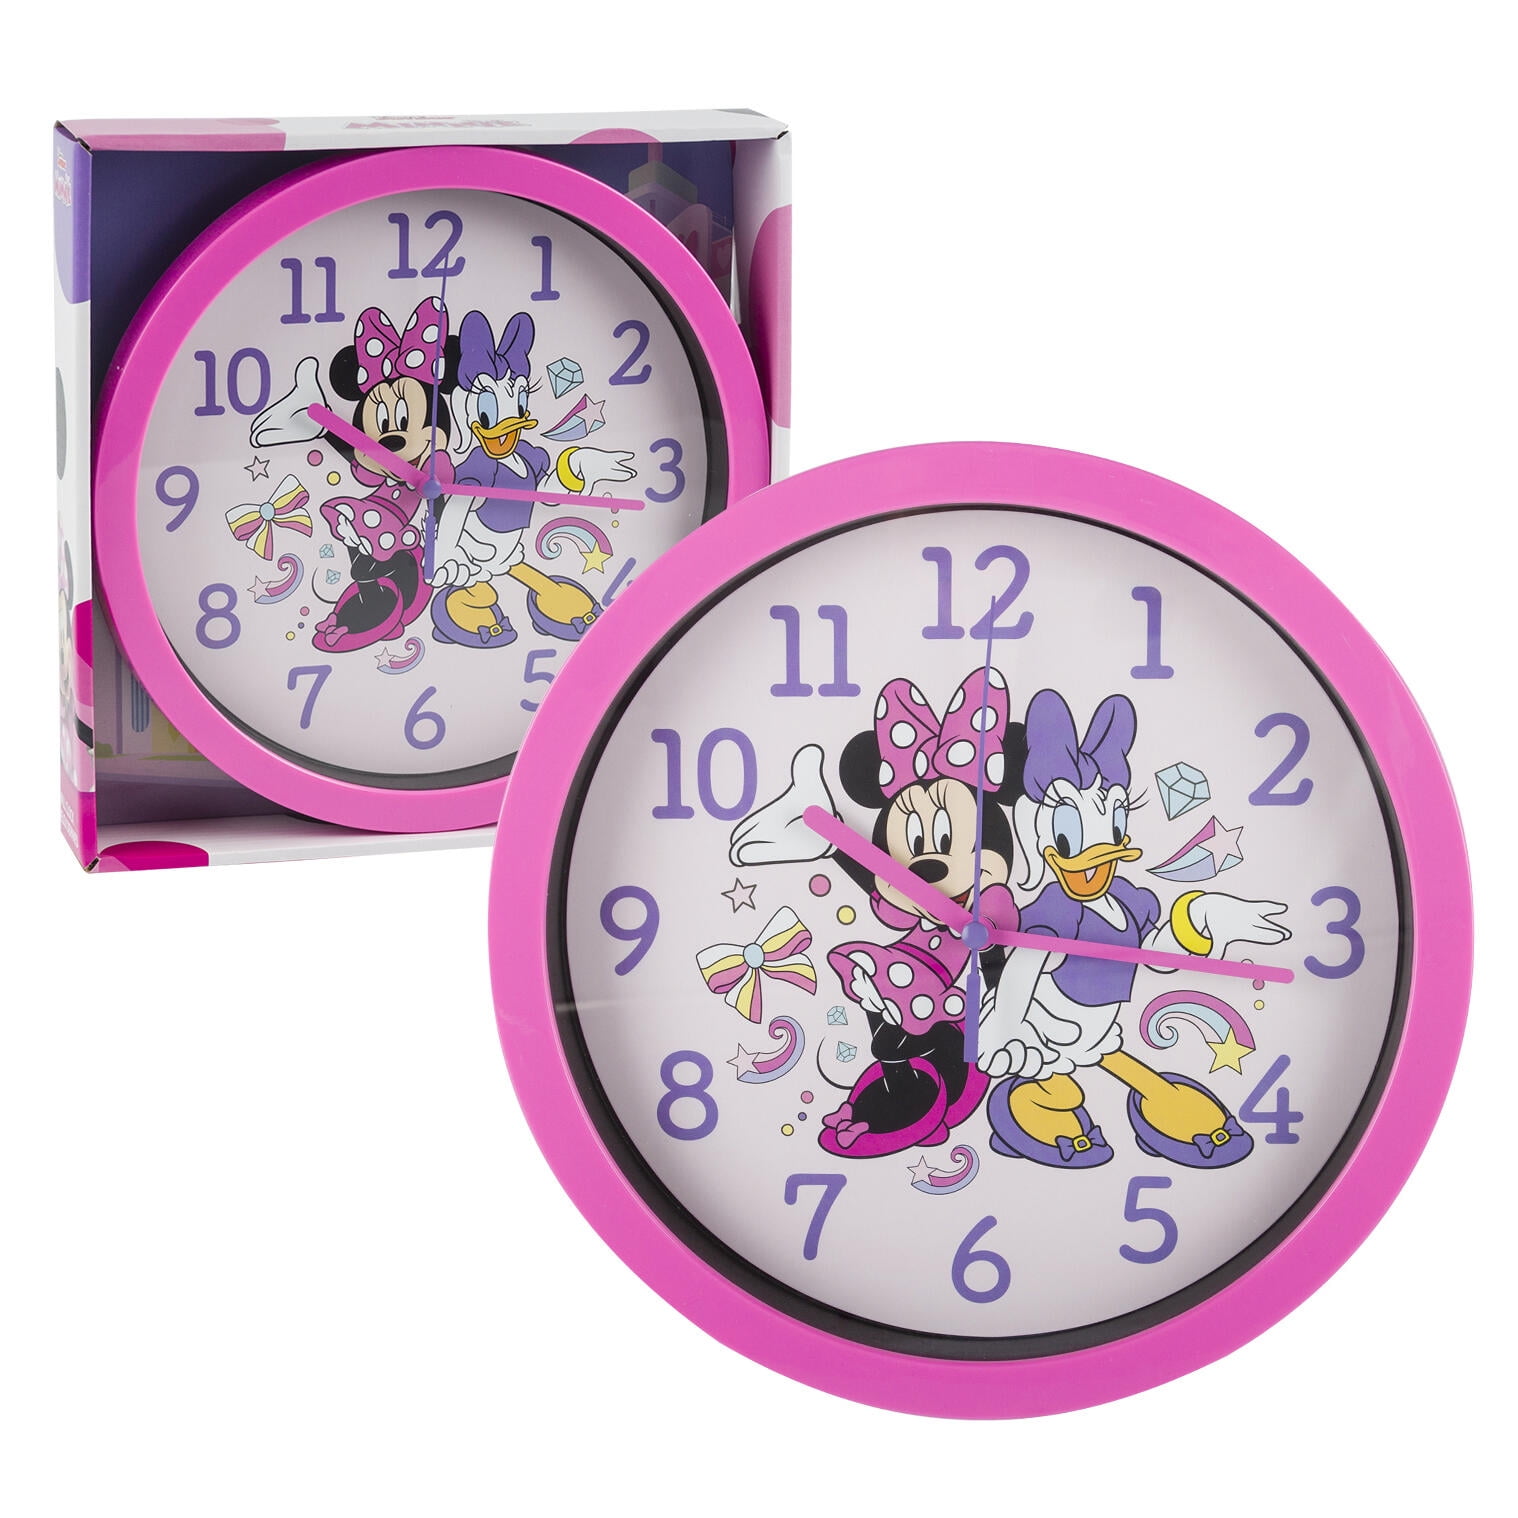 All Disney Characters wall Clock 10" will be nice Gift and Room wall Decor W174 